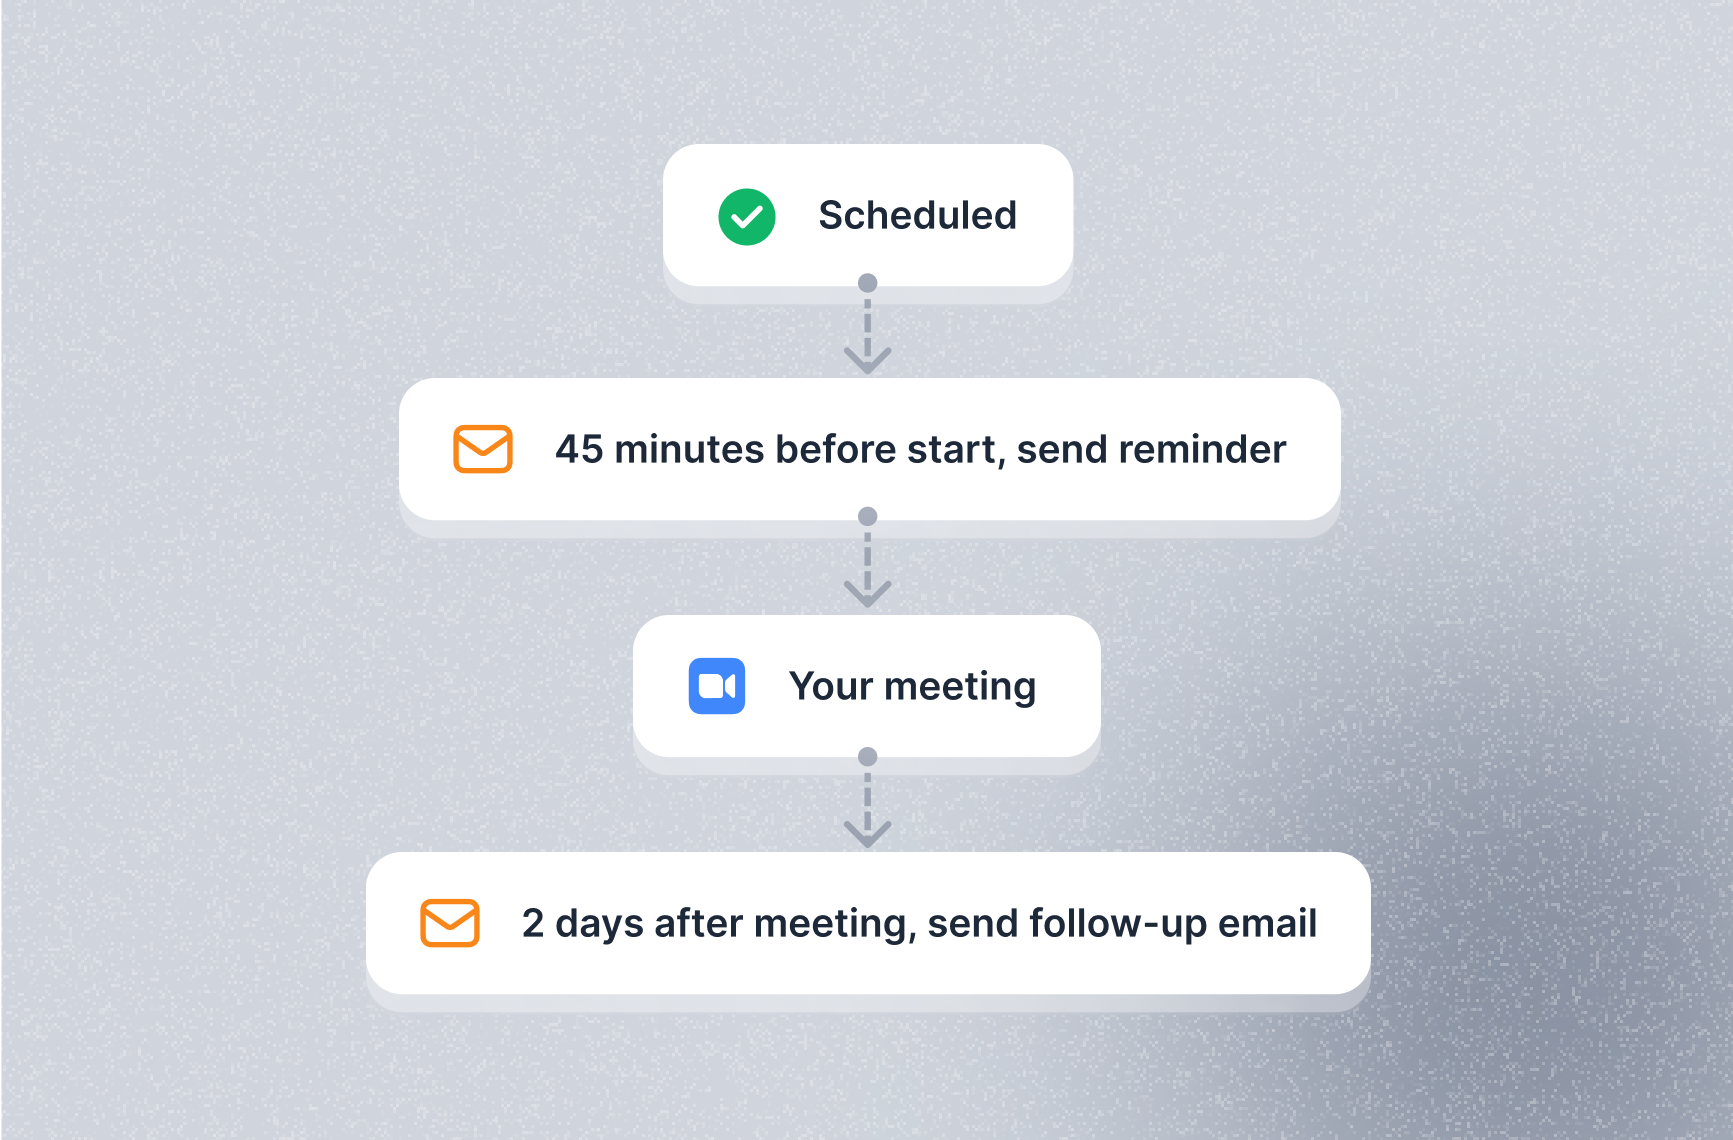 Optimize your appointment bookings and increase your efficiency with our intuitive workflow management system and automate your meeting lifecycle.